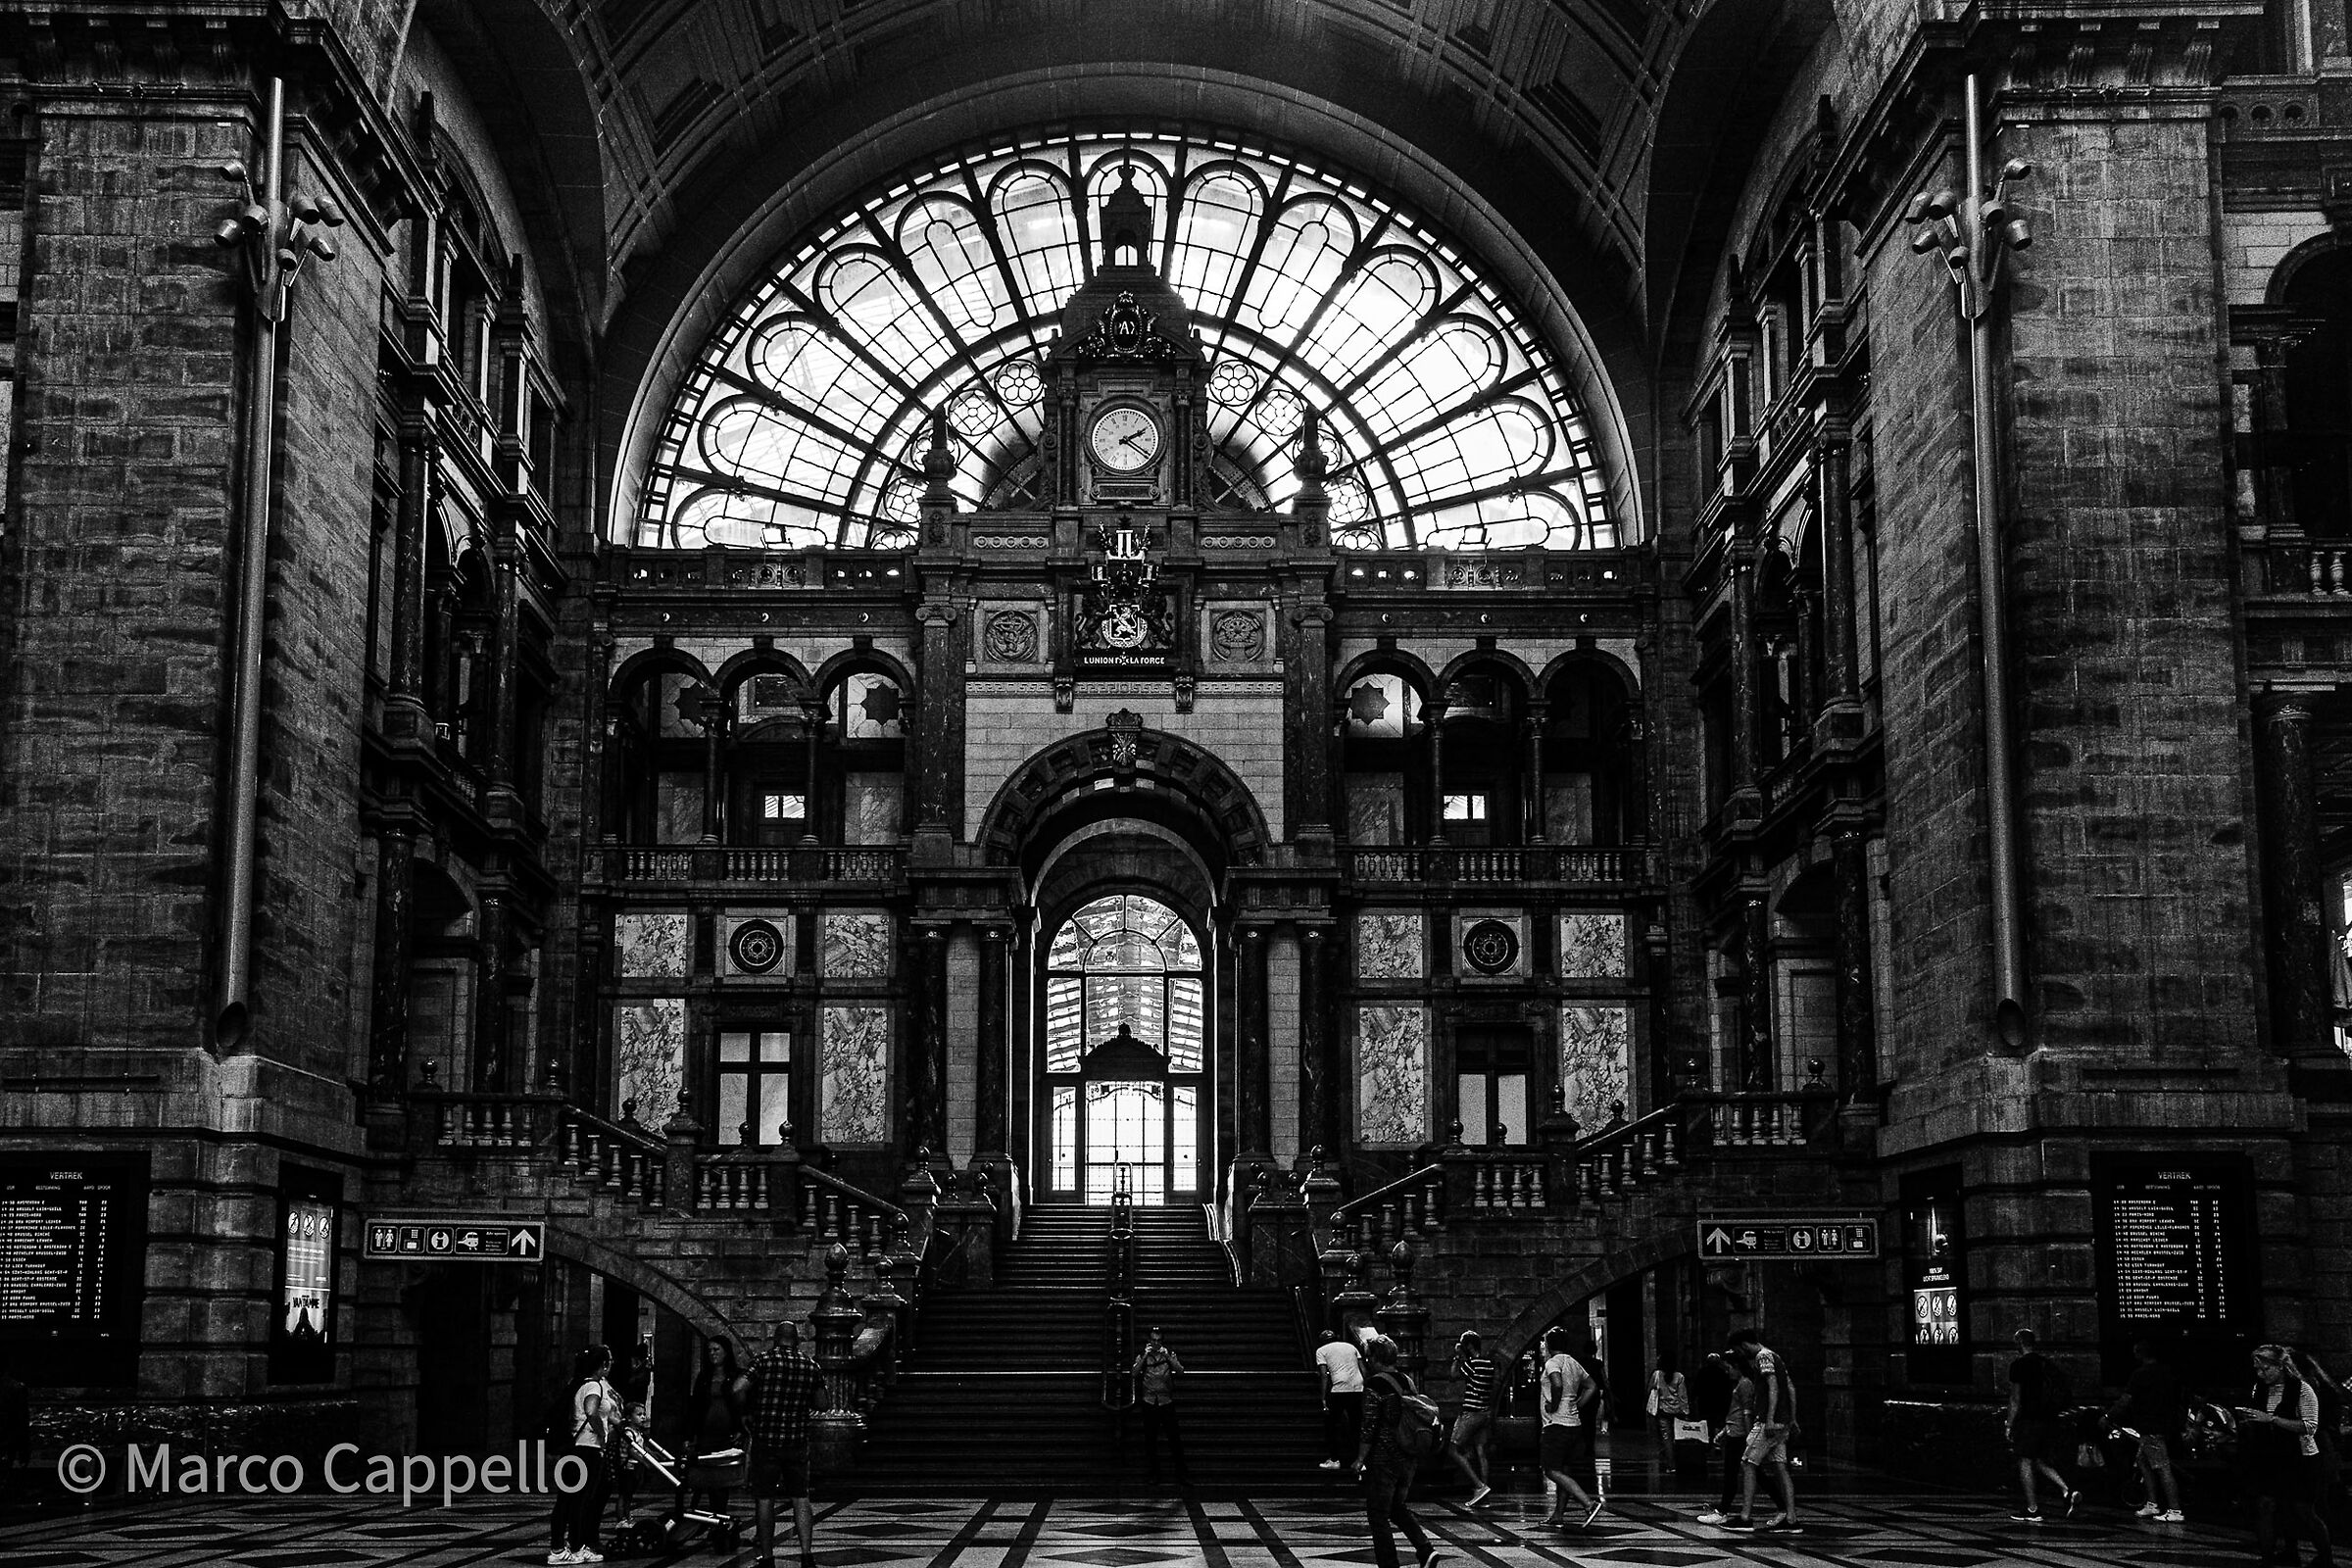 The entrance to the Antwerp train station...